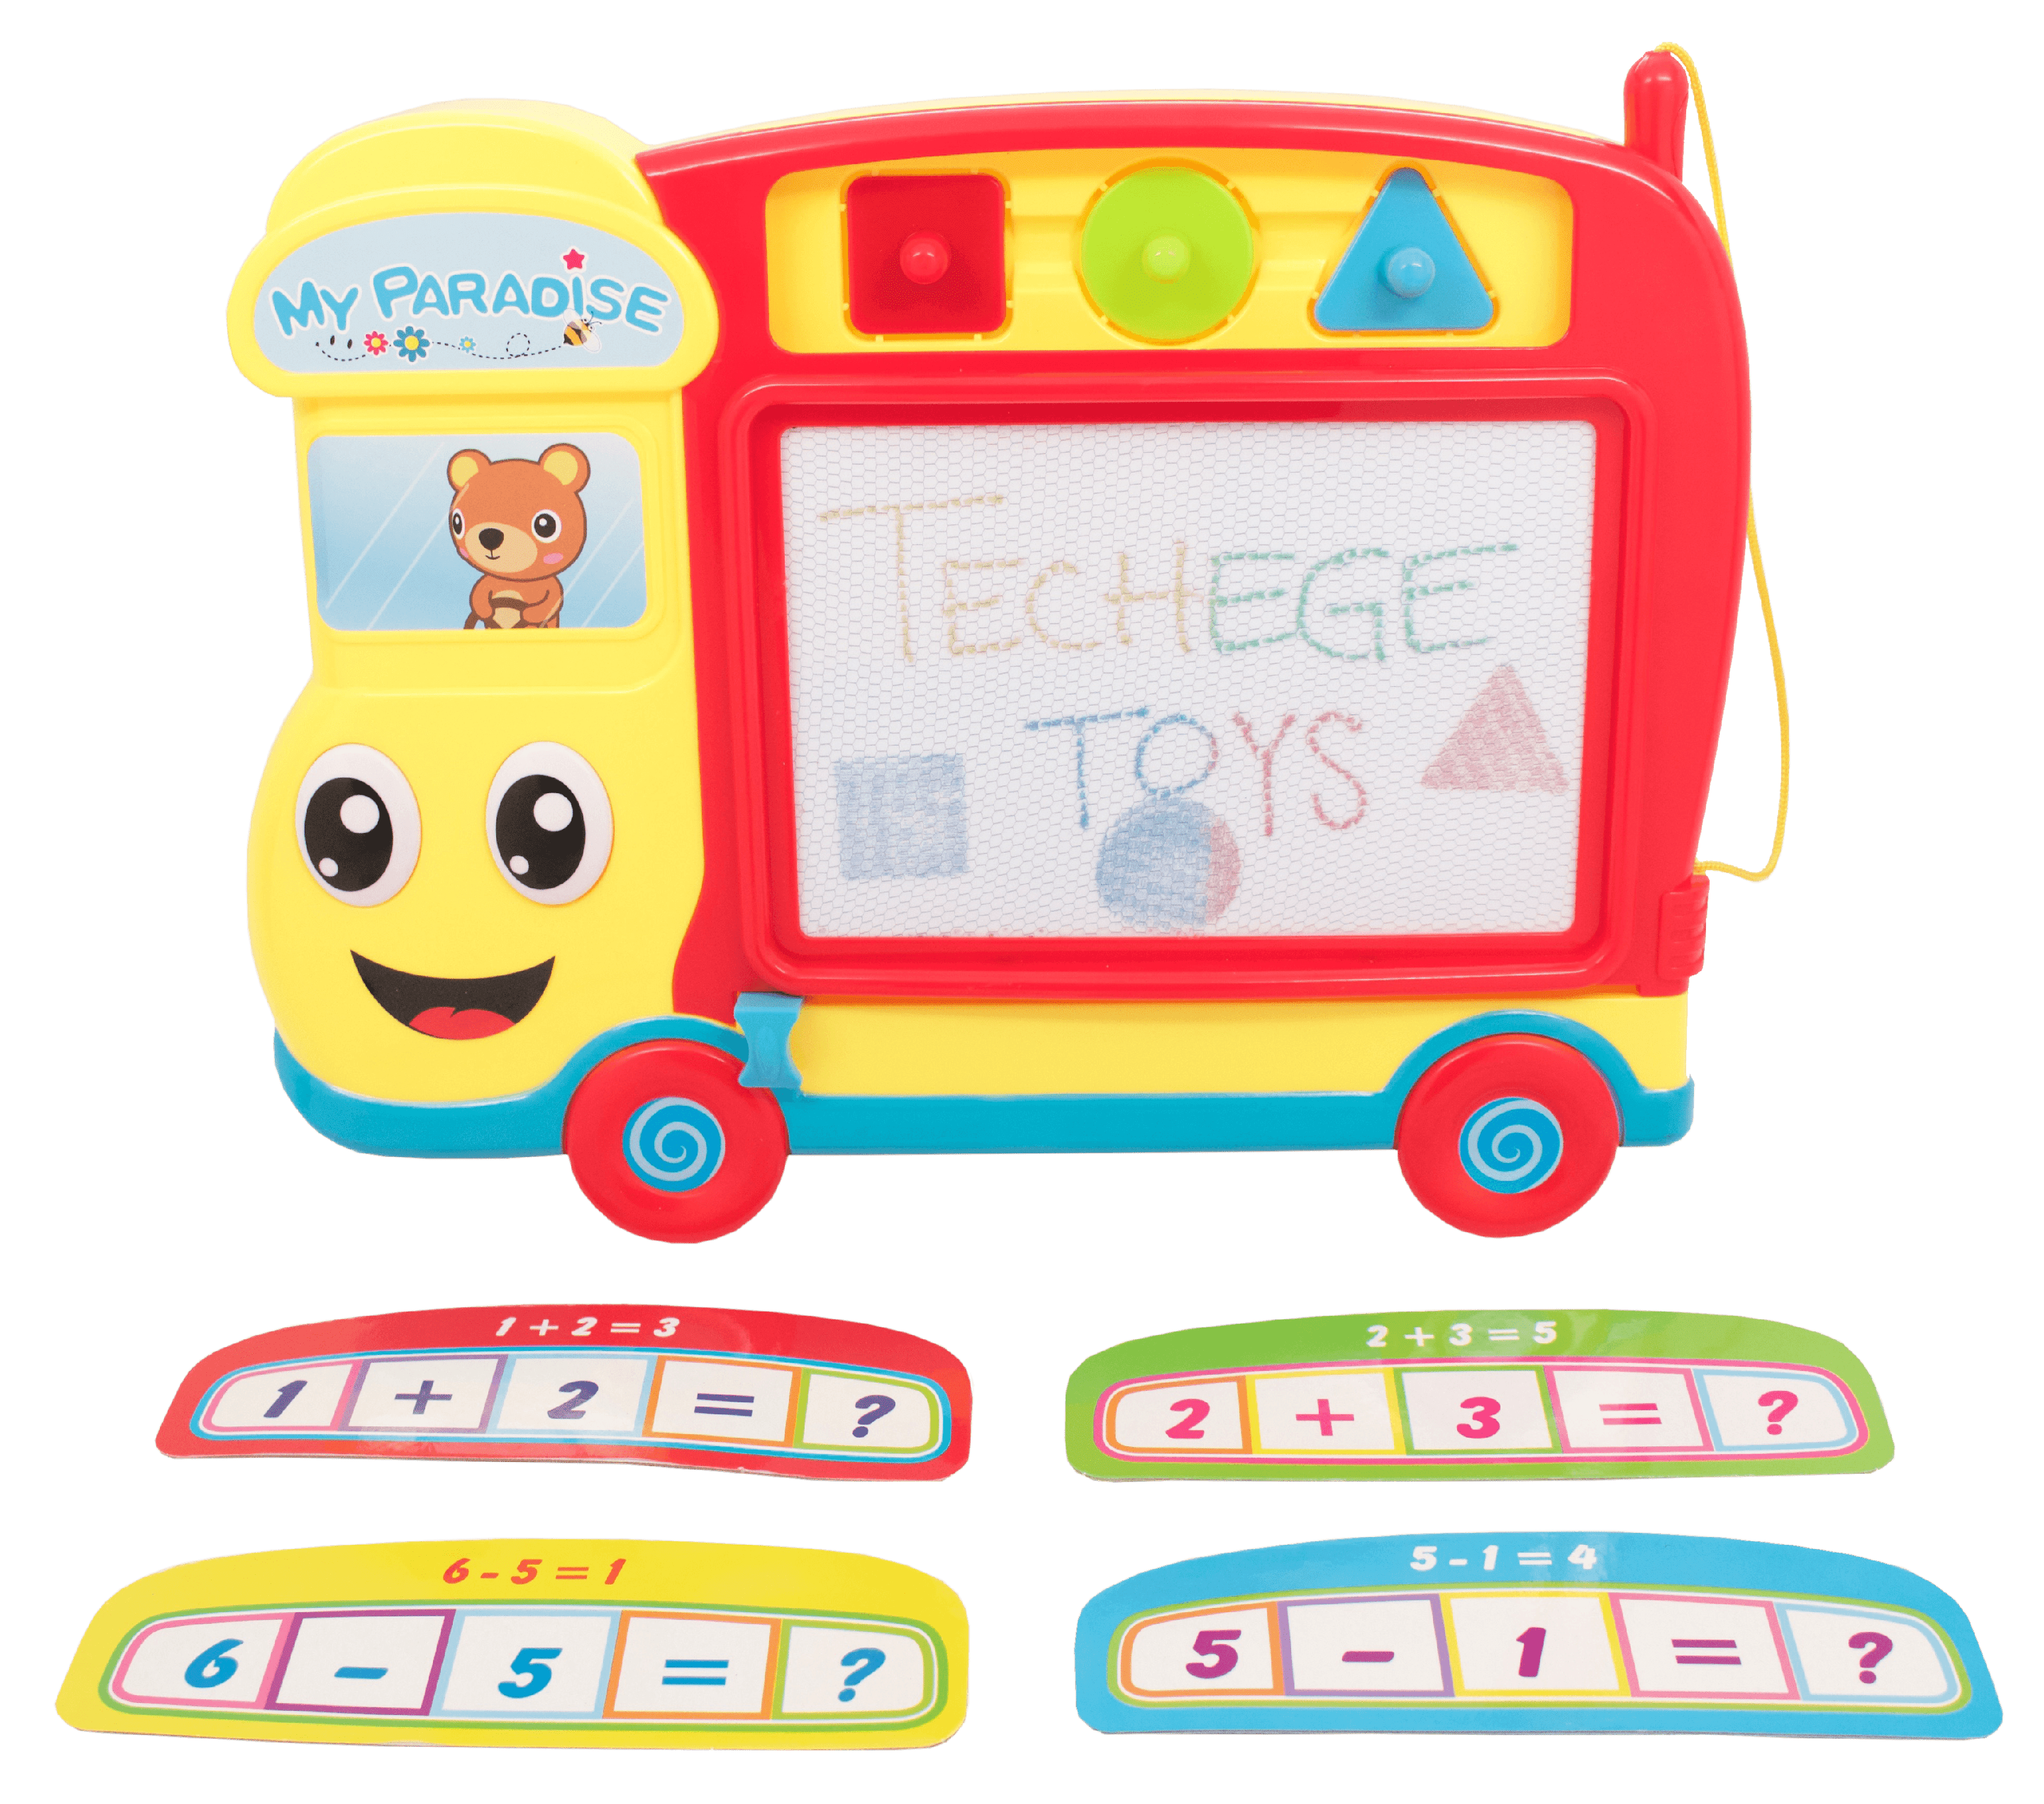 Stampers New Details about   Magic Kids Freestyle Sketching Drawing Toy Pad Art Gift w/ Stylus 